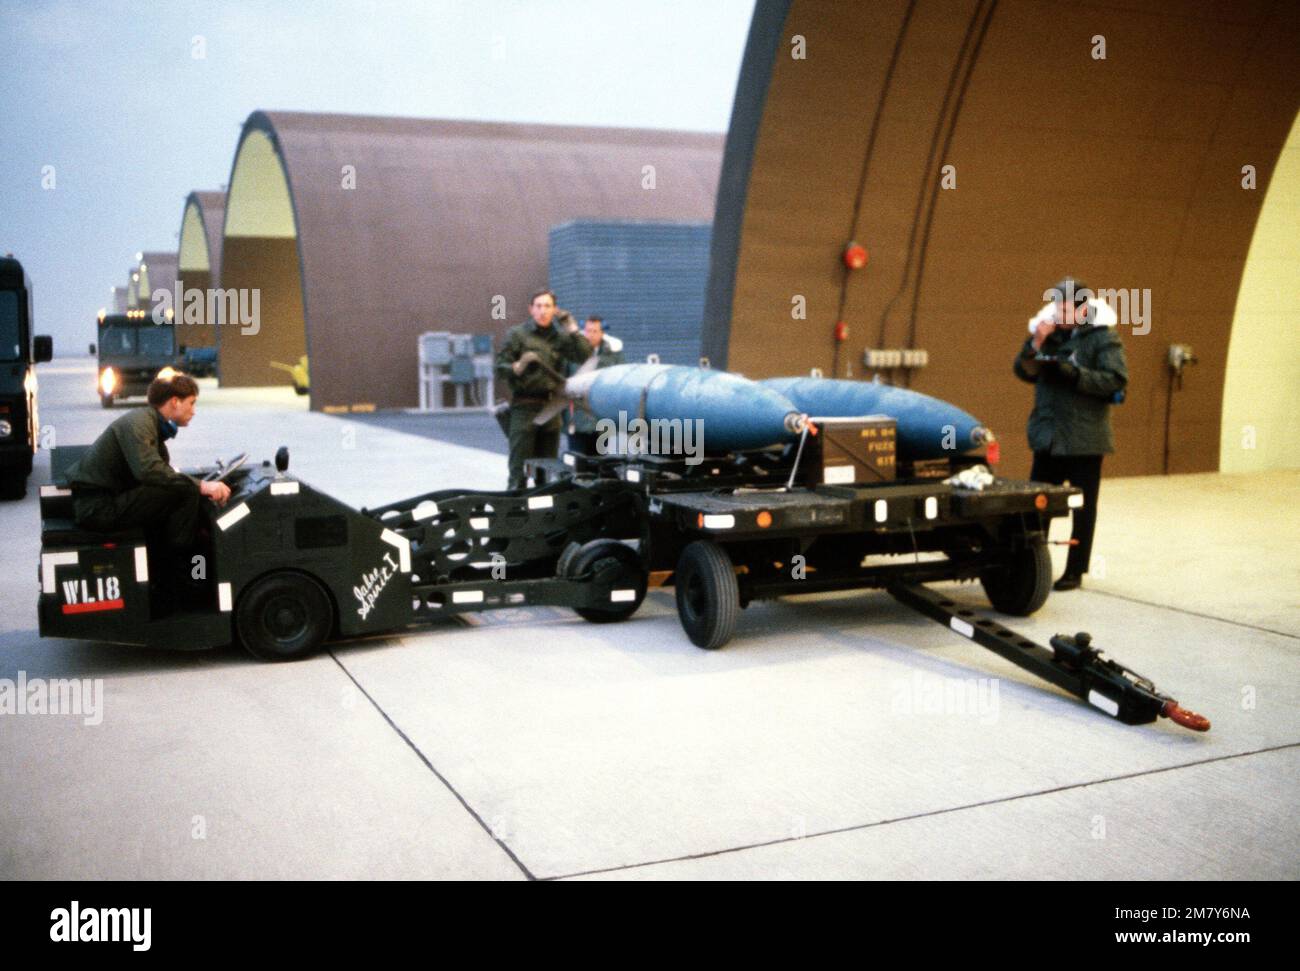 Team members of the 36th Aircraft Maintenance Unit begin Sabre Spirit I munitions loading competition by loading an F-4E Phantom II aircraft with a Mark 84 2,000-pound bomb. Base: Osan Air Base Country: Republic Of Korea (KOR) Stock Photo